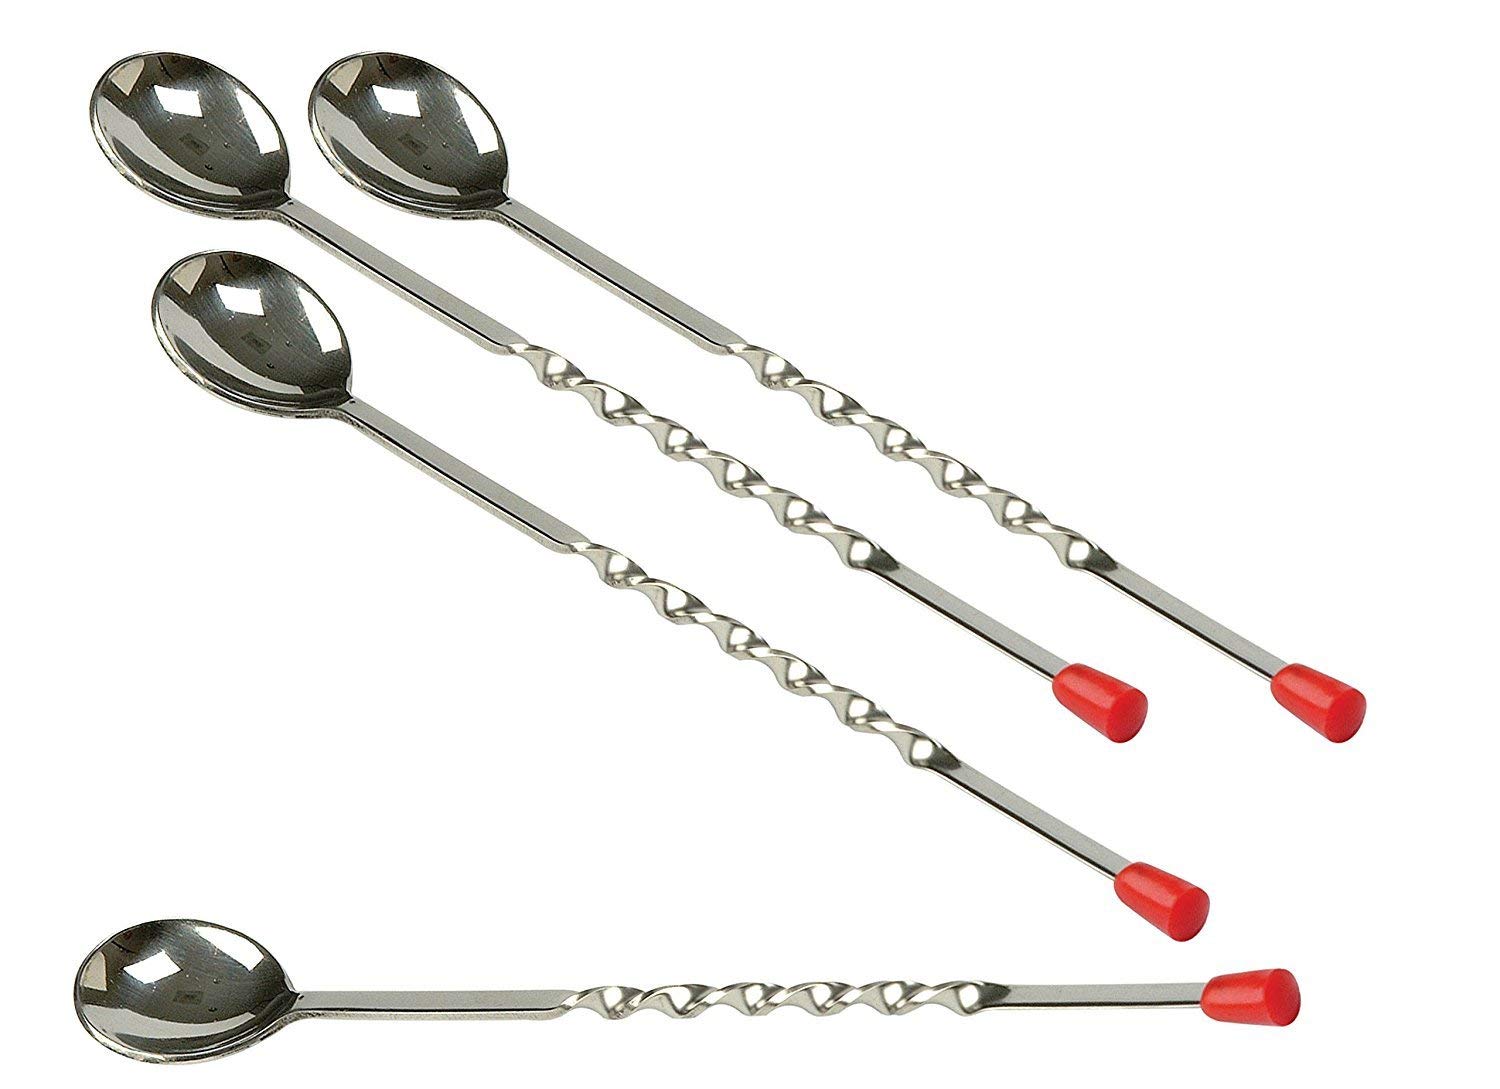 NJ Cocktail Mixing Spoons, Long Stainless Steel Mixing Stirrer Spoons, Strong Non-Rust Bartender Mixing Spoons Stirrer for Home & Bar Use Red Knob: 4 Pcs Set